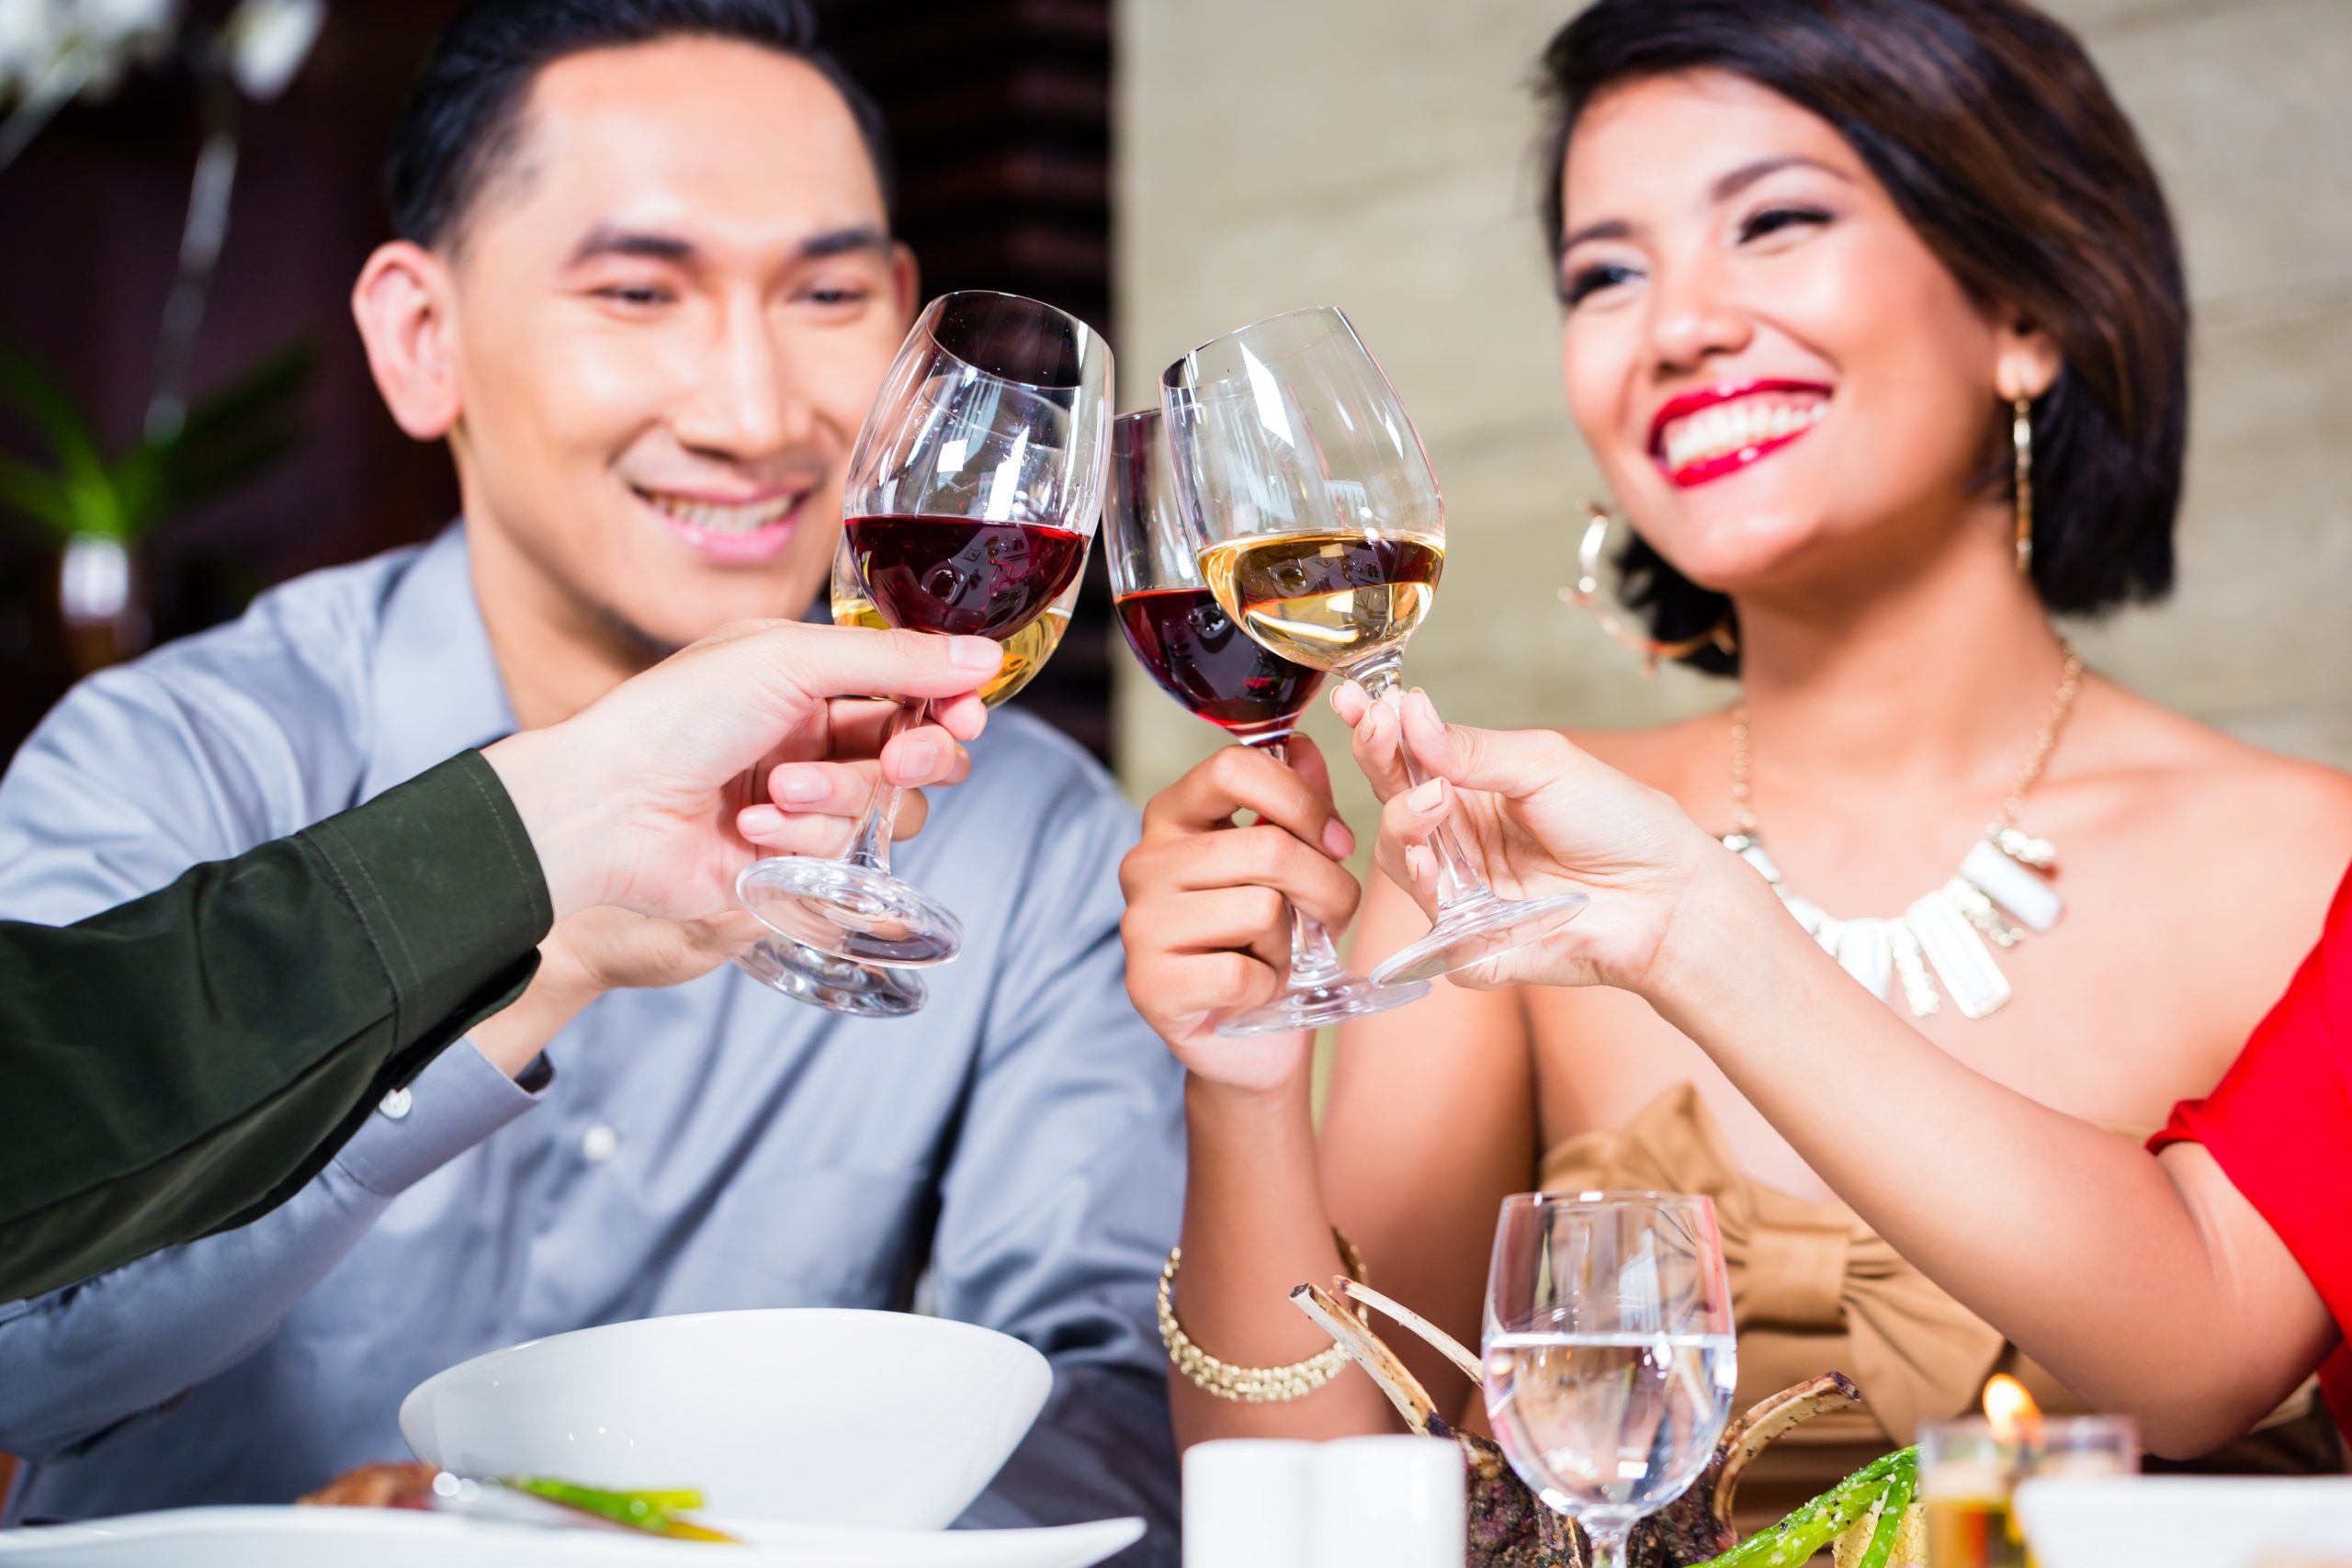 A man and woman are smiling and clinking wine glasses with another couple